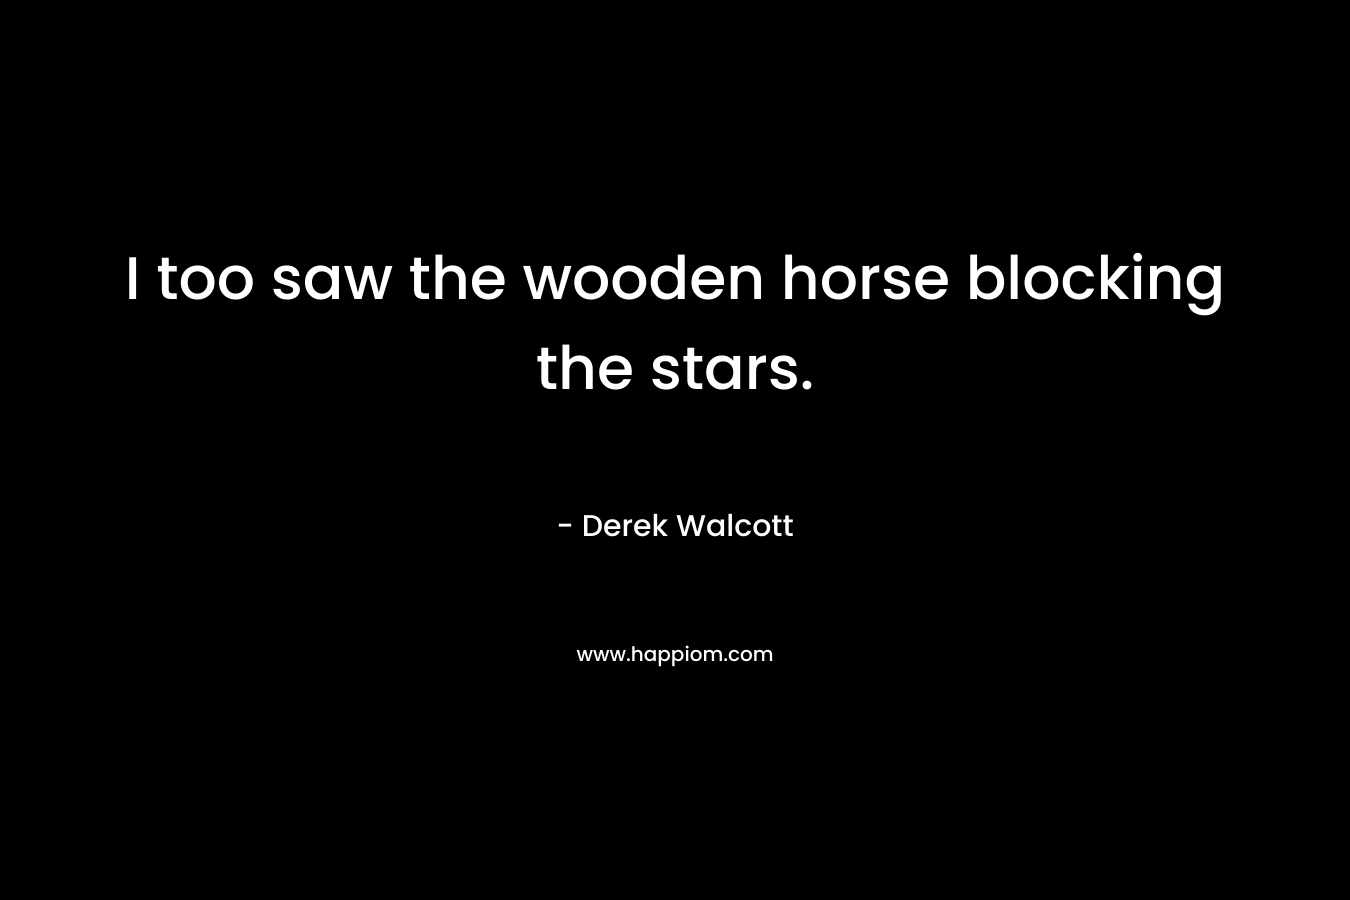 I too saw the wooden horse blocking the stars.